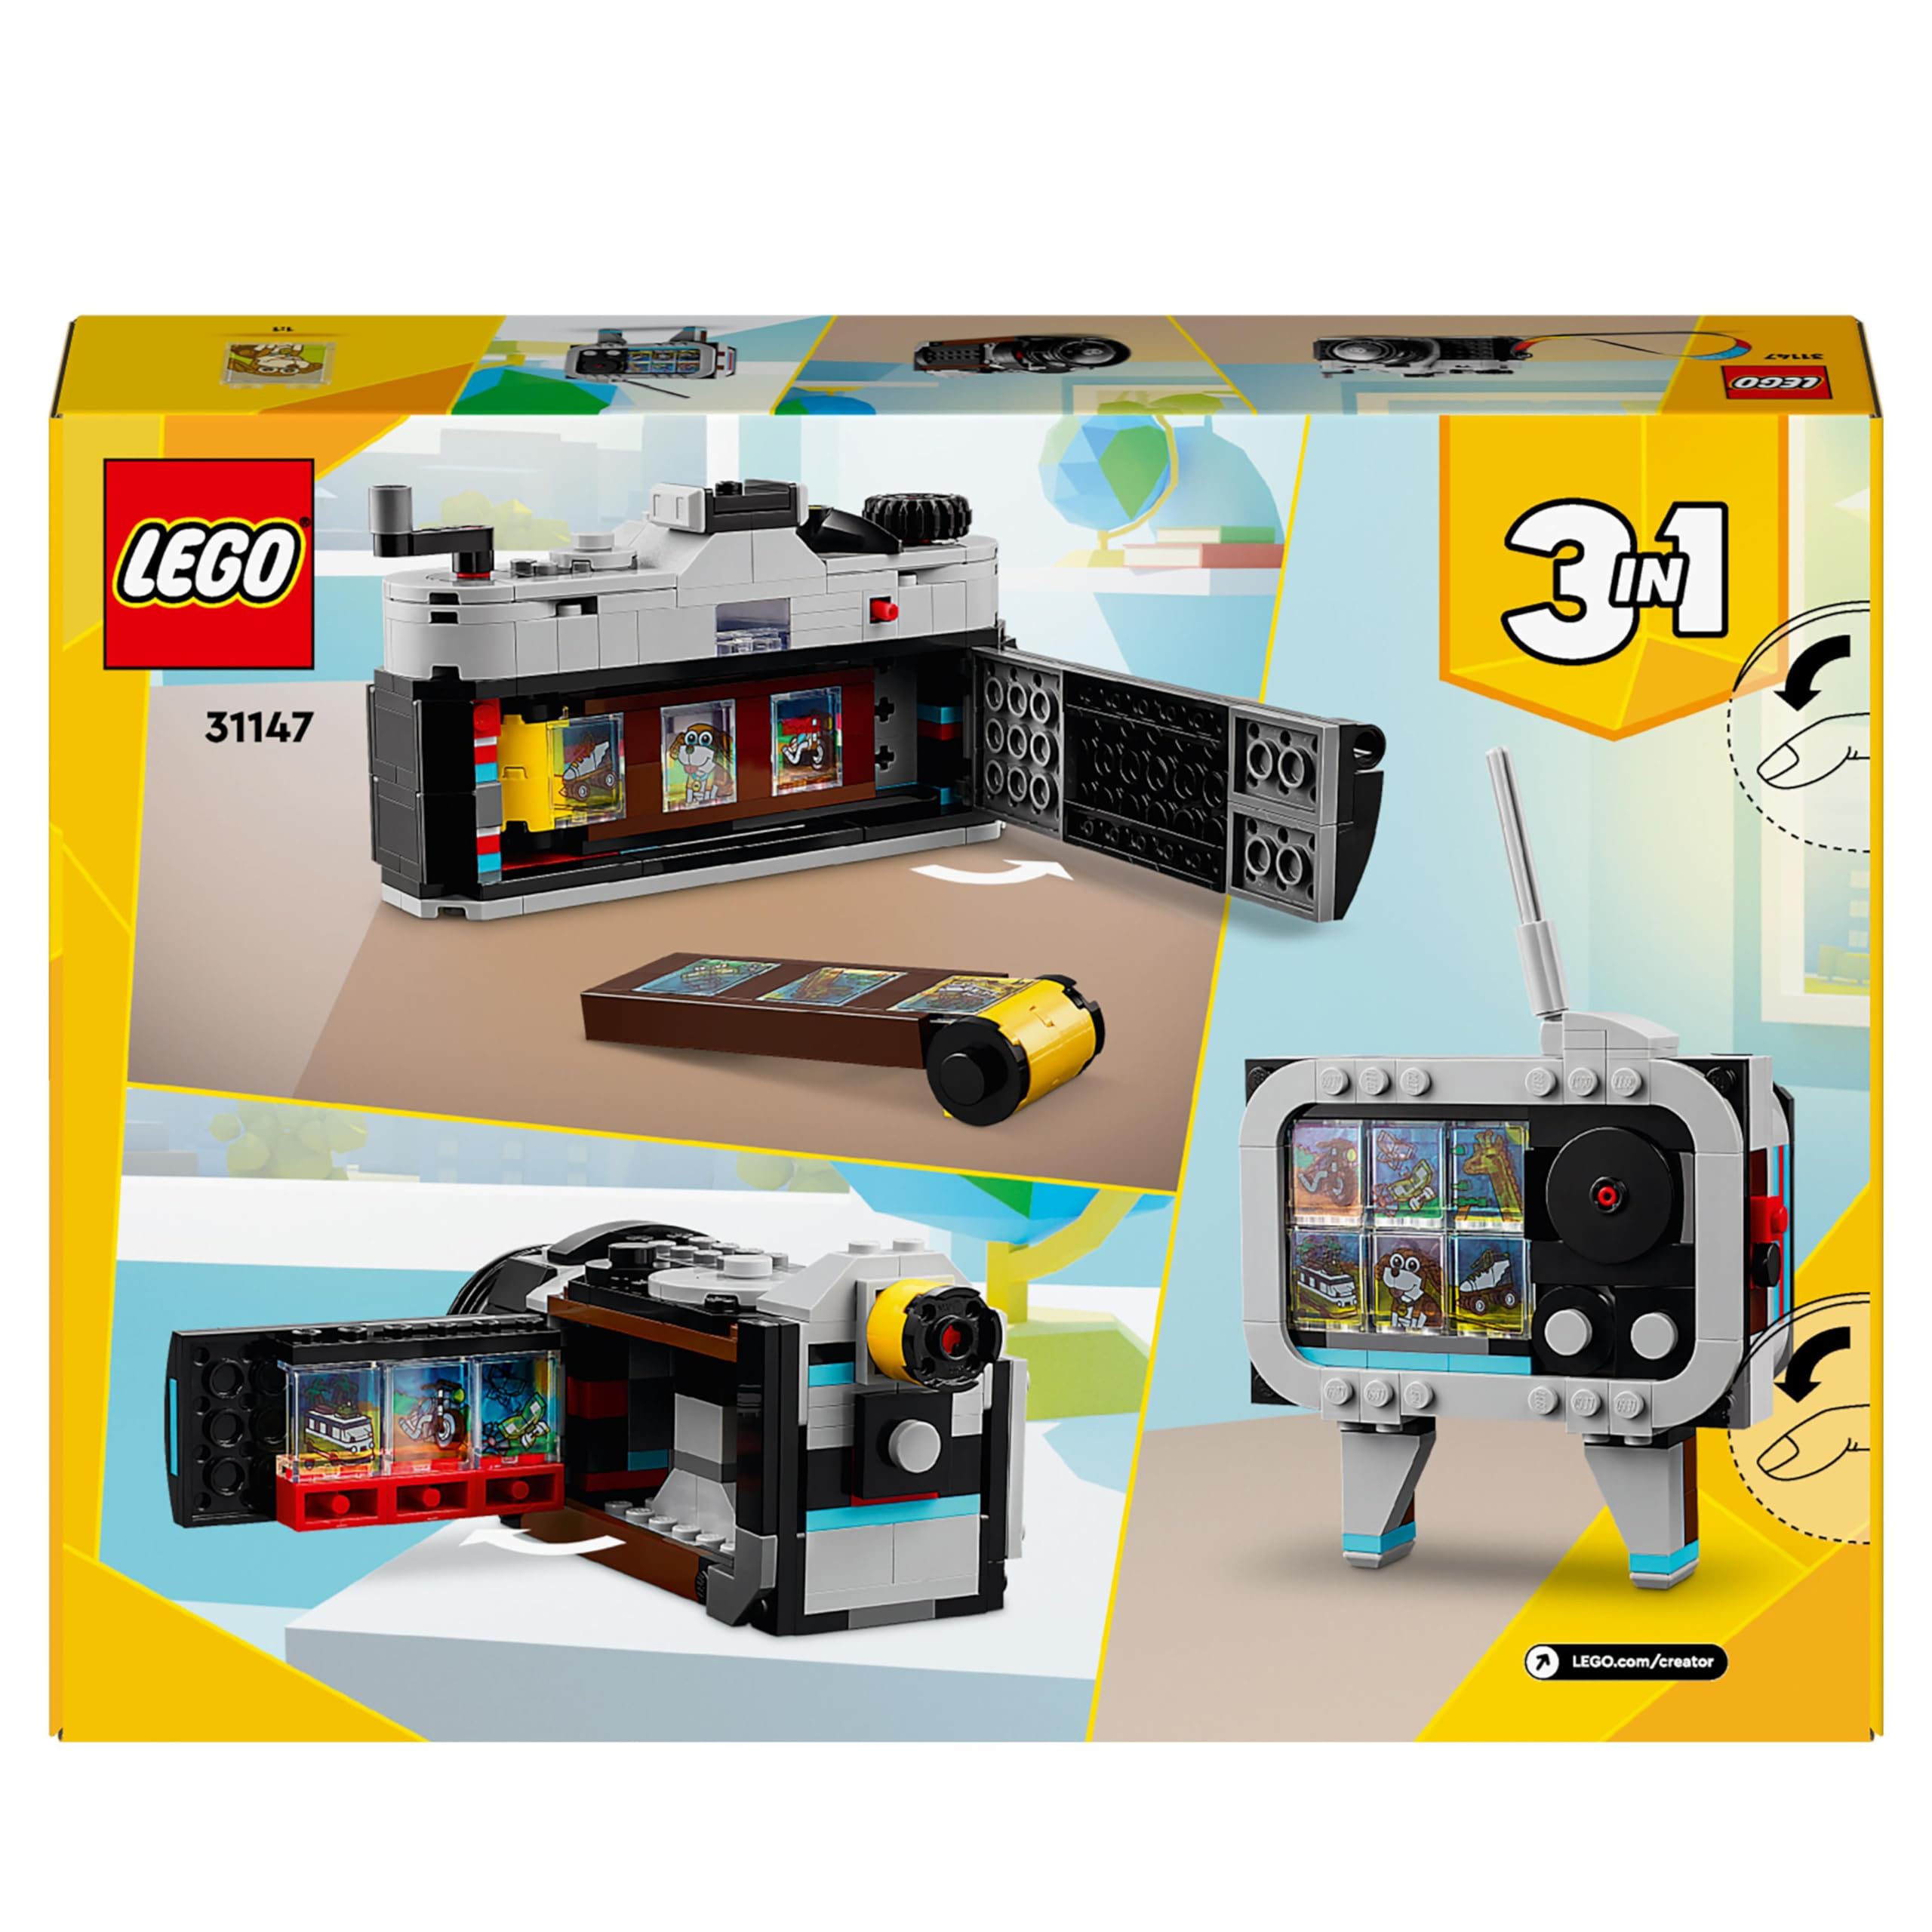 LEGO Creator 3in1 Retro Camera Toy to Video Camera to TV Set, Kids' Desk Decoration or Bedroom Accessories, Photography Gifts for Girls and Boys Aged 8 Plus Years Old Who Enjoy Creative Play 31147